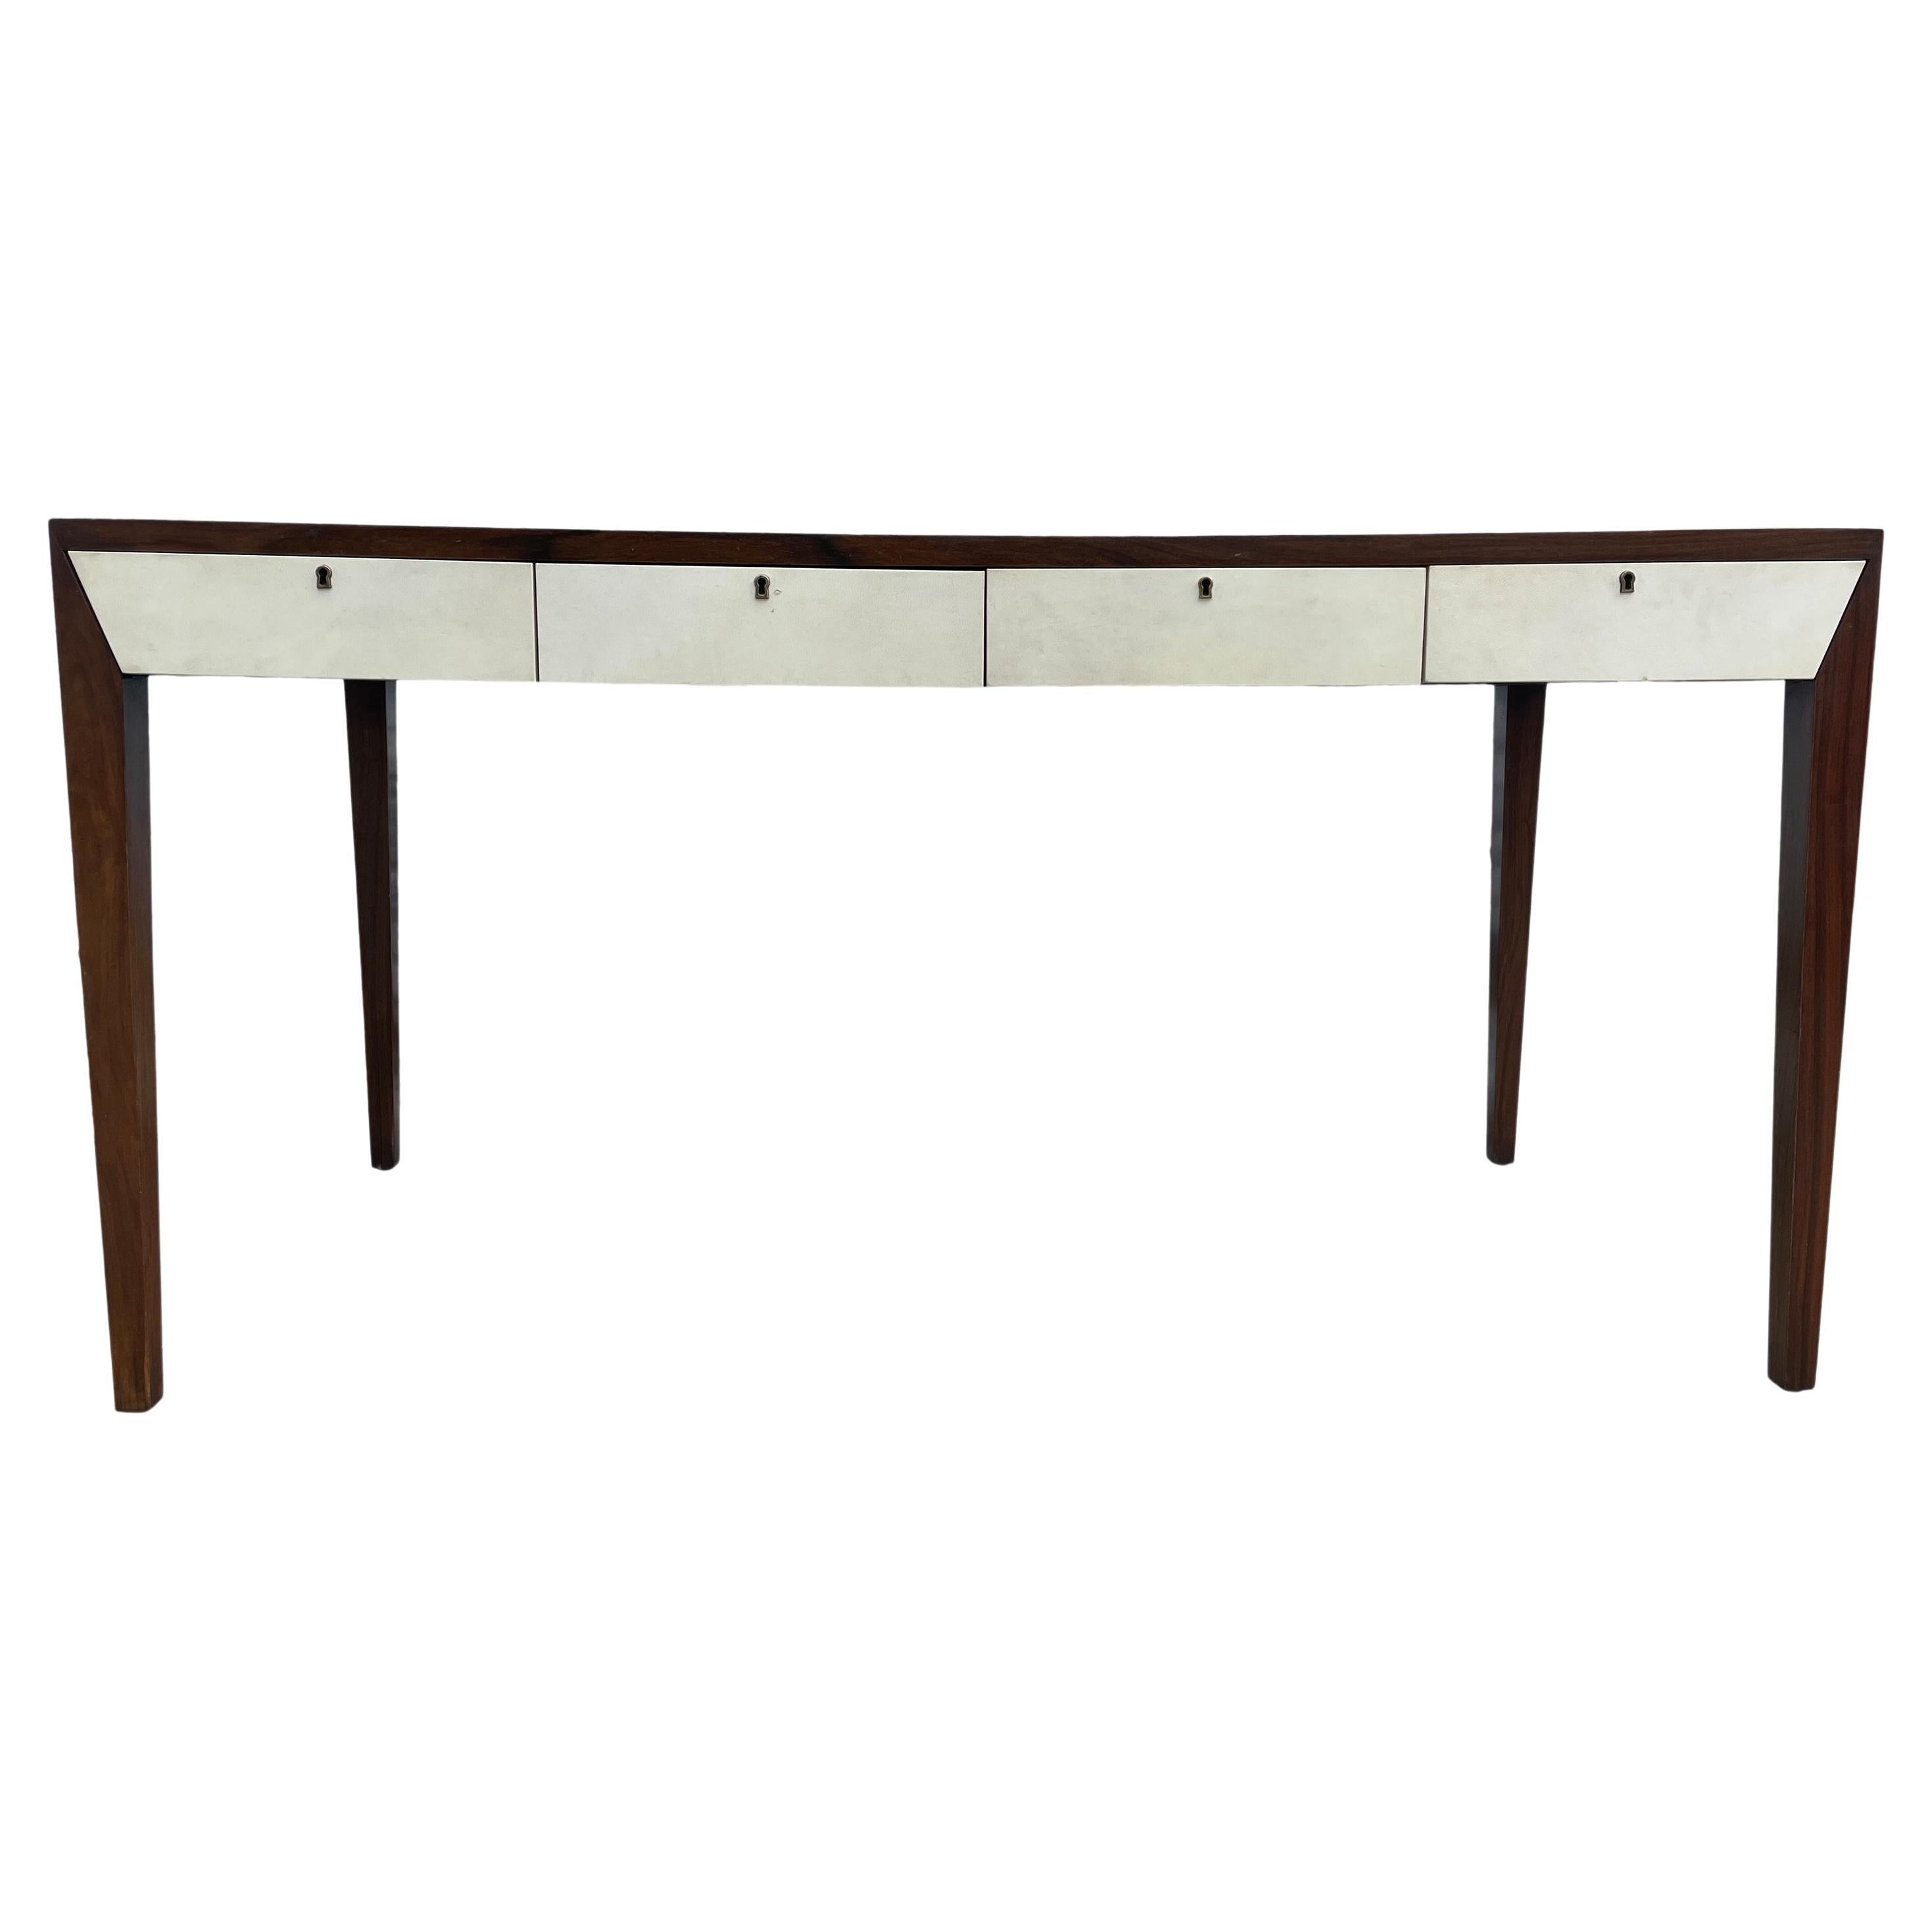 Beautiful modern style of Ralph Lauren solid mahogany desk with 4 leather front drawers. Very High end woodwork and construction. Diamond Wood pattern on desk top. Very high end clear gloss lacquer finish. smooth metal drawer slides on solid Oak